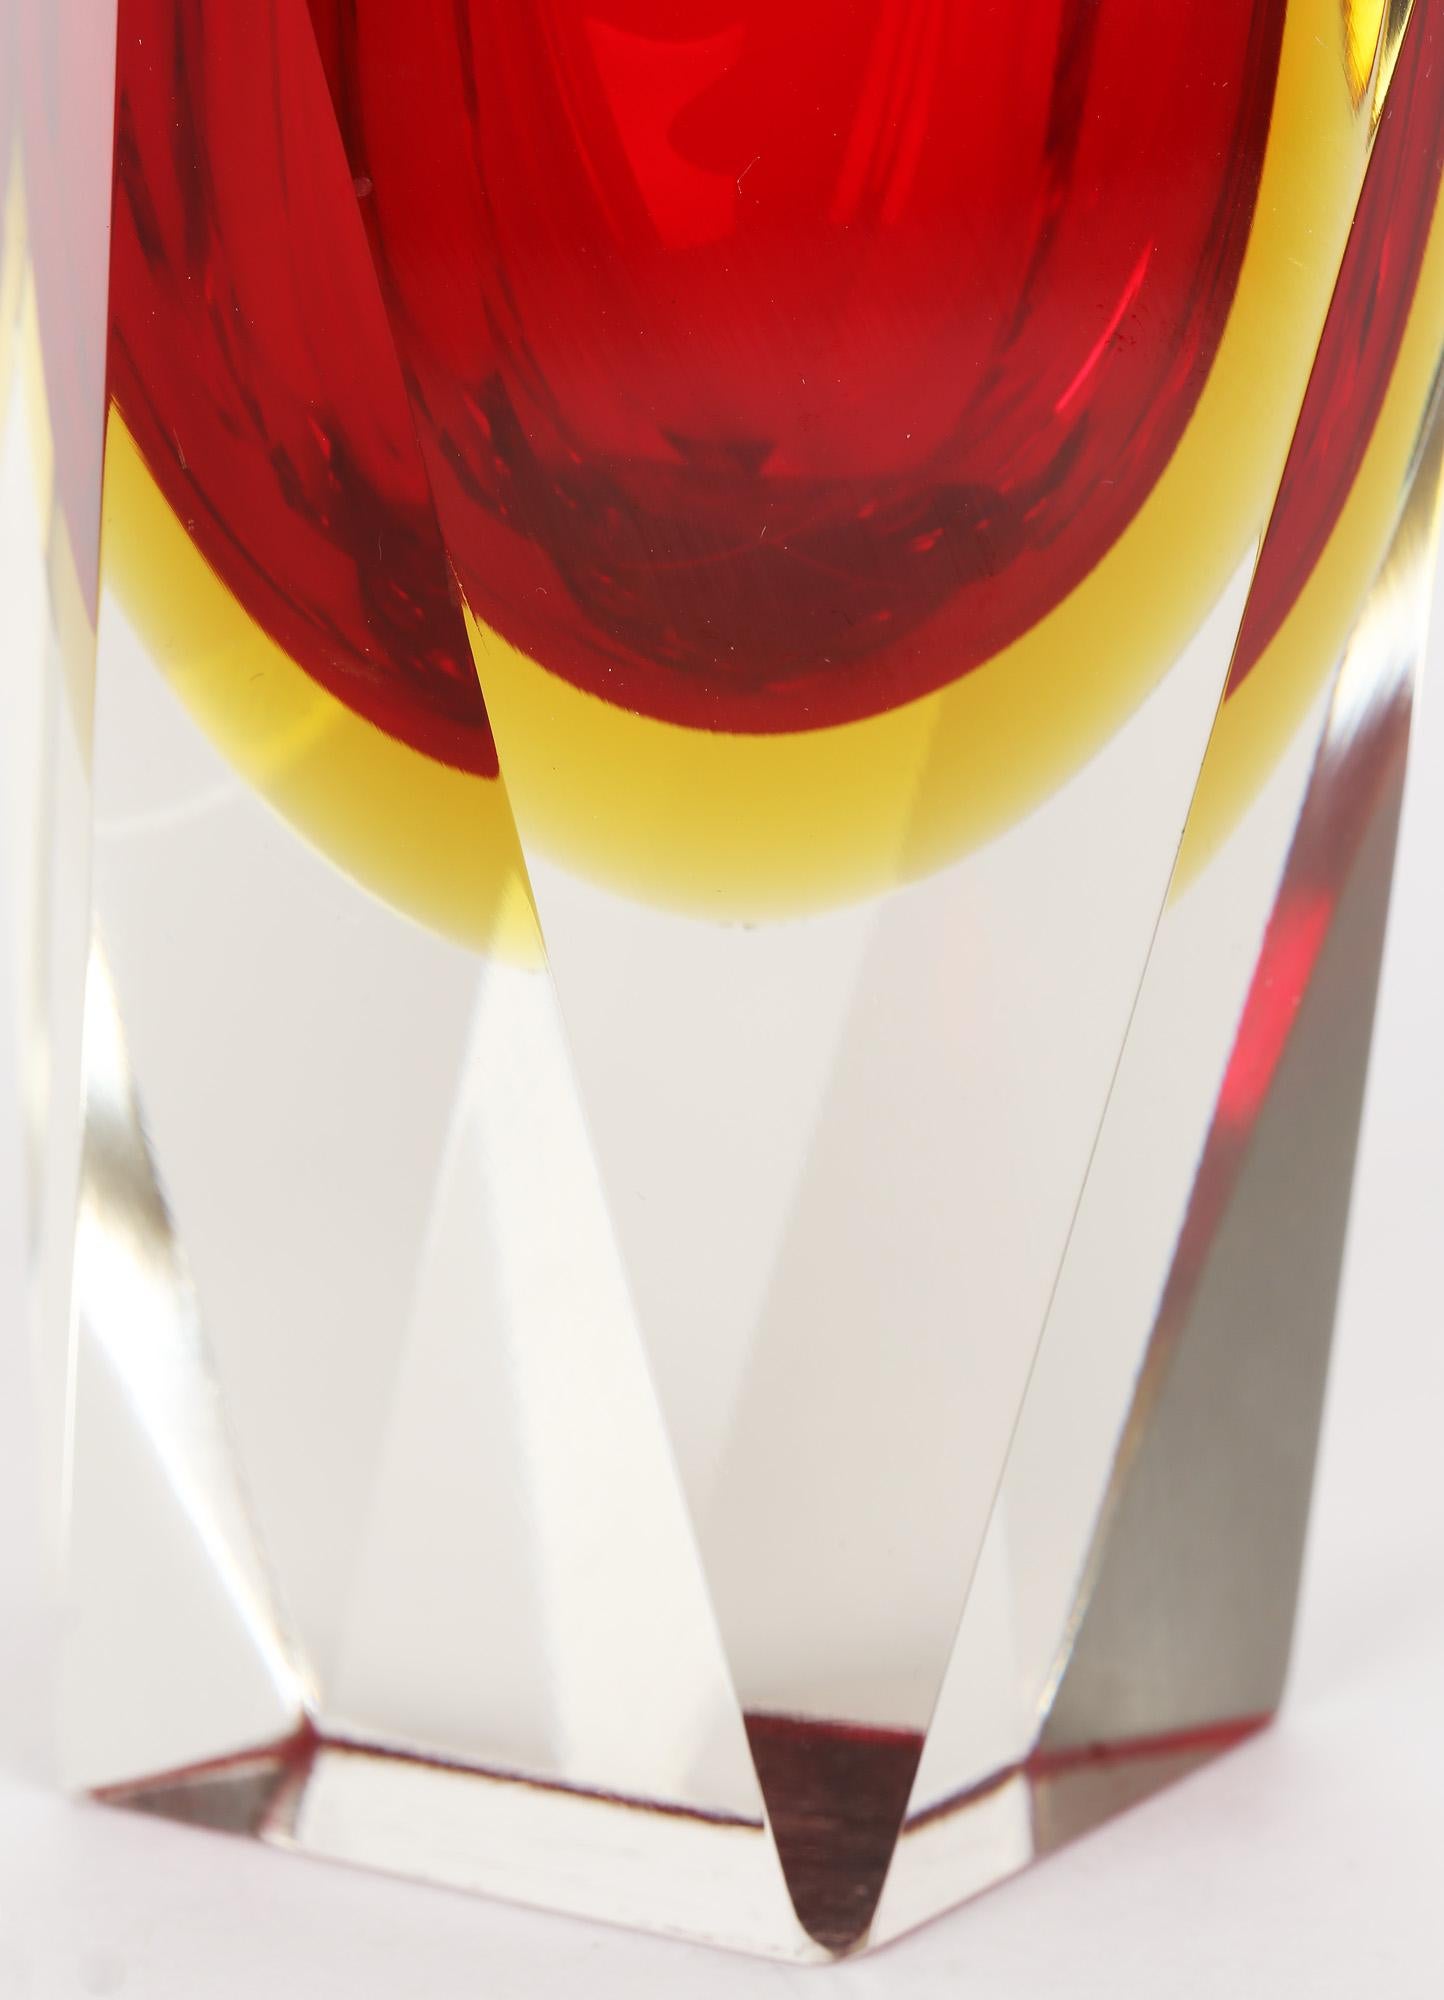 Pagnin & Bon Italian Murano Red and Yellow Sommerso Facet Cut Glass Vase For Sale 6